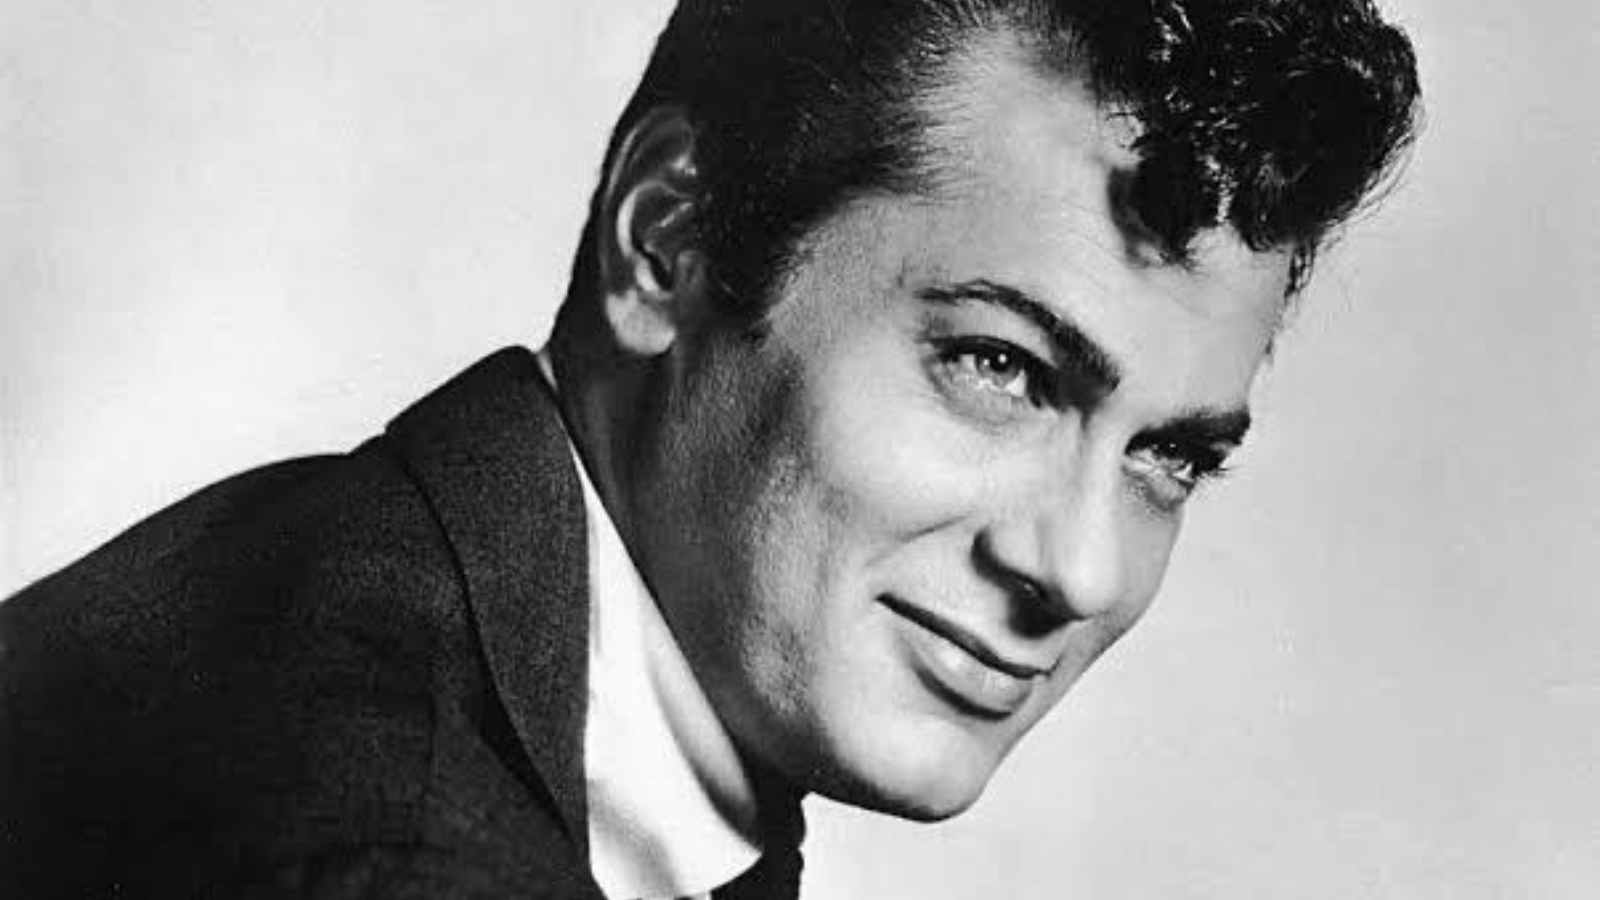 Tony Curtis revealed in his memoirs that he was expecting a baby with Marilyn Monroe when she was married to Arthur Miller